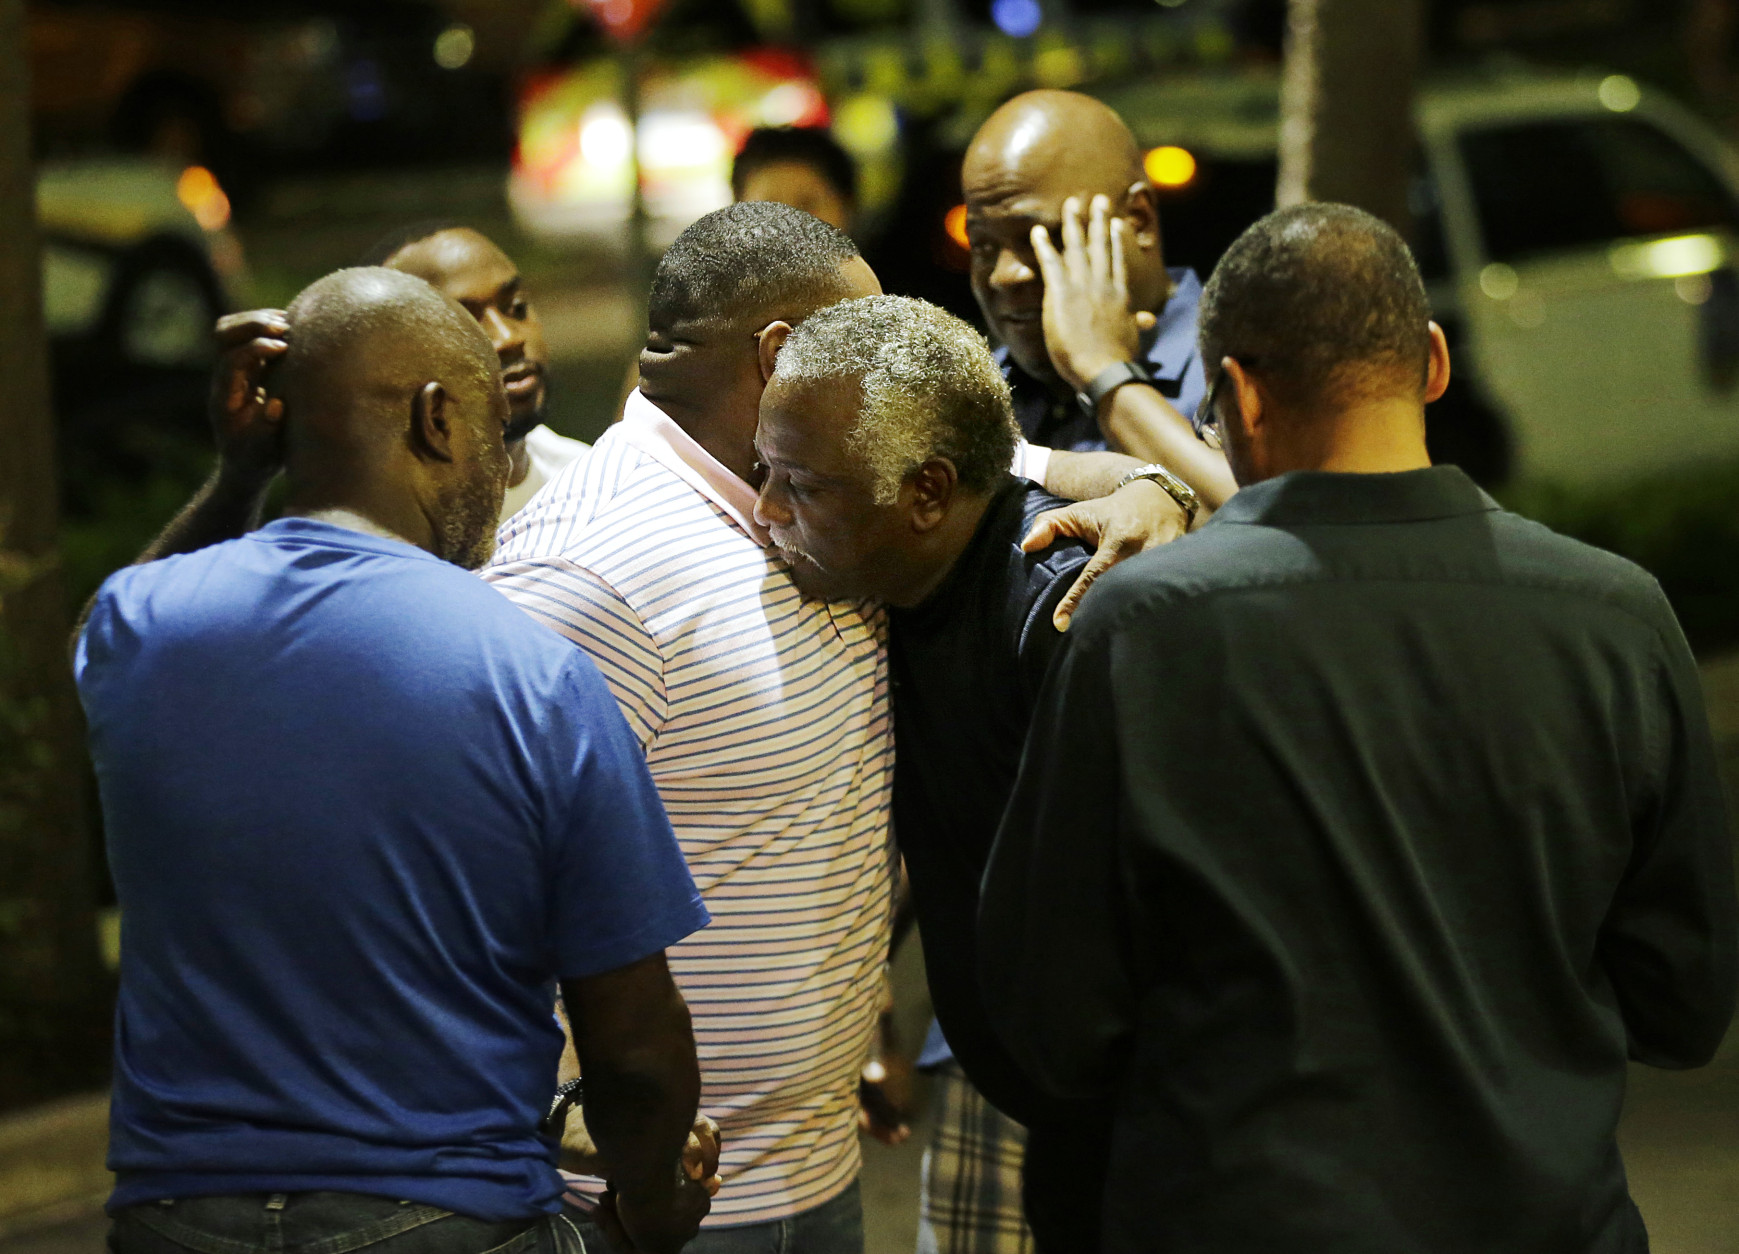 Worshippers embrace following a group prayer across the street from the Emanuel AME Church following a shooting Wednesday, June 17, 2015, in Charleston, S.C. (AP Photo/David Goldman)